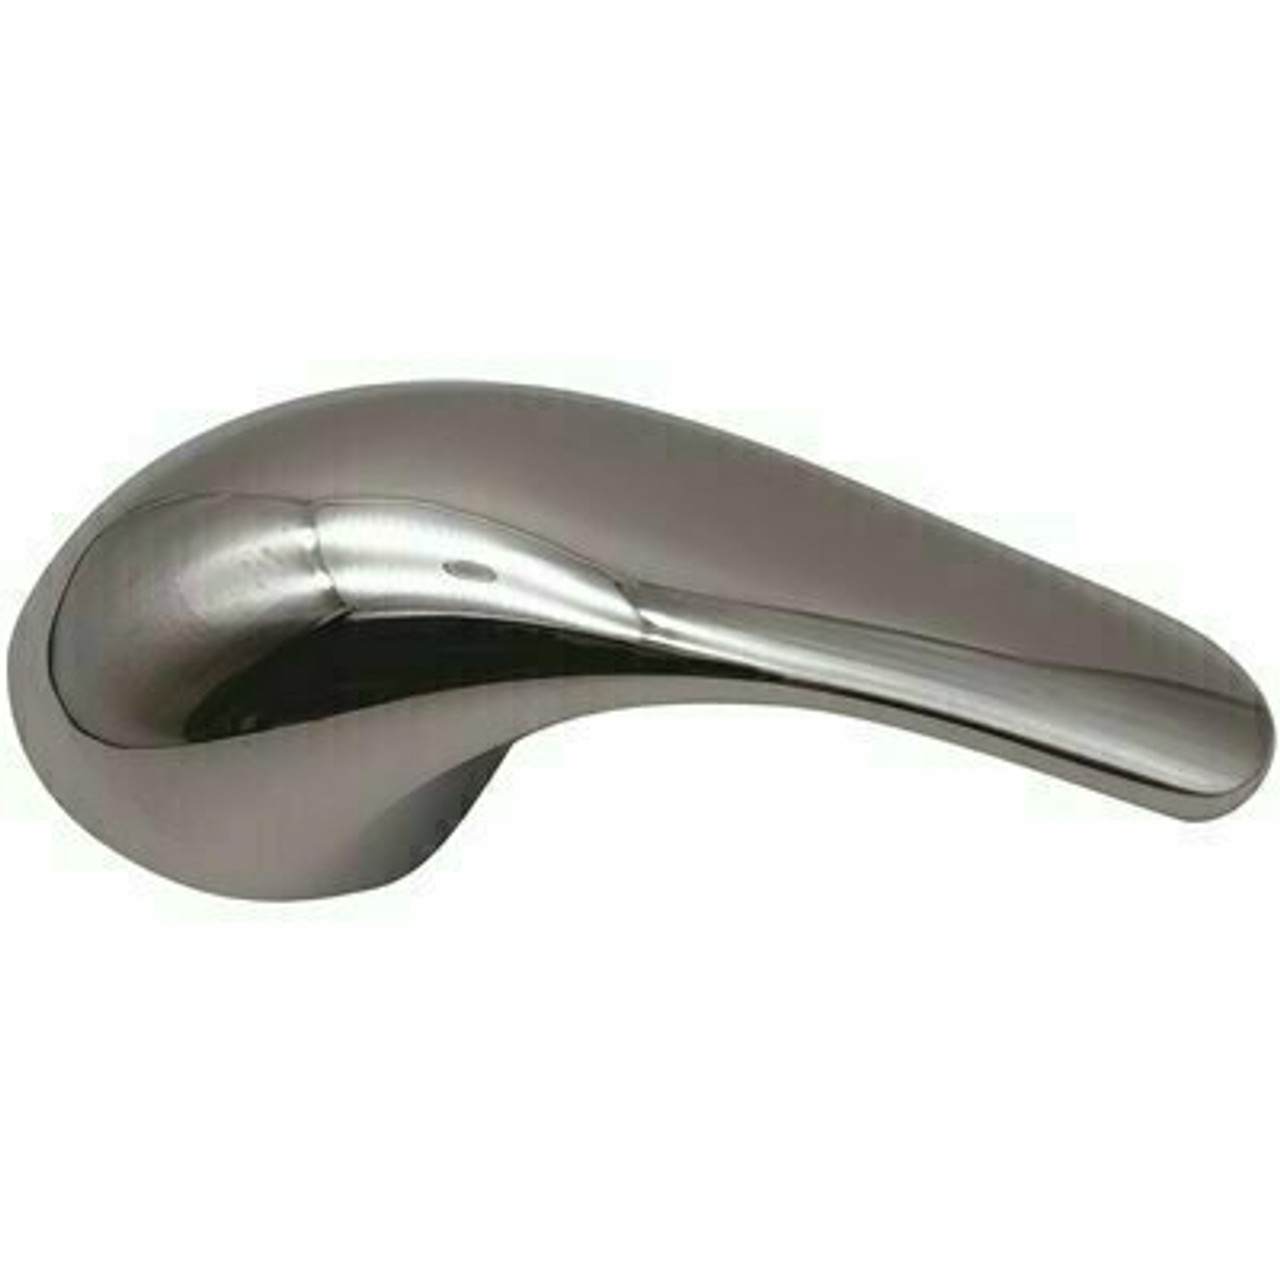 Lincoln Products Psp006 4 In. Length Lever Handle For Single-Handle Shower Faucets In Chrome Finish